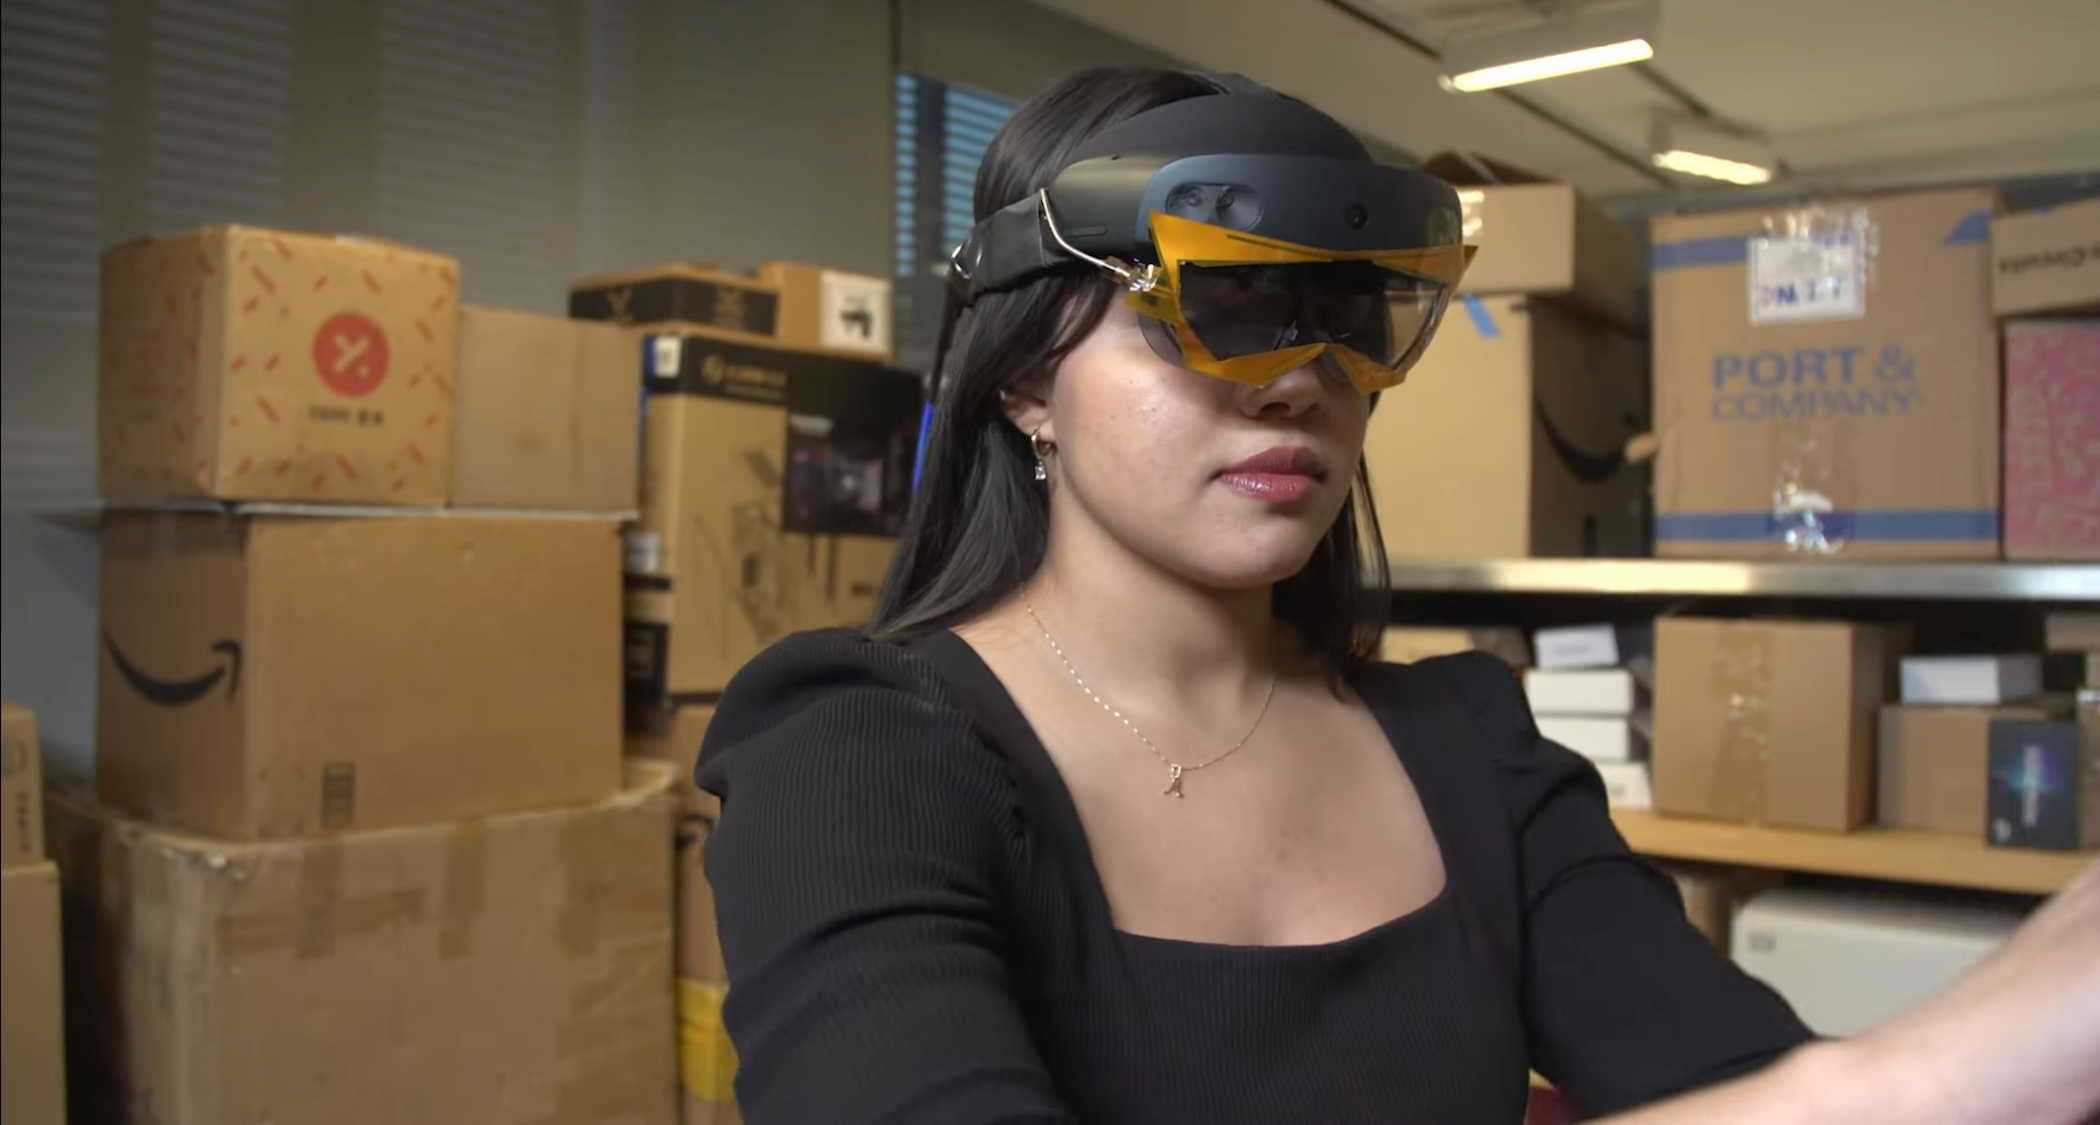 This modified AR headset might enable you to discover your misplaced keys